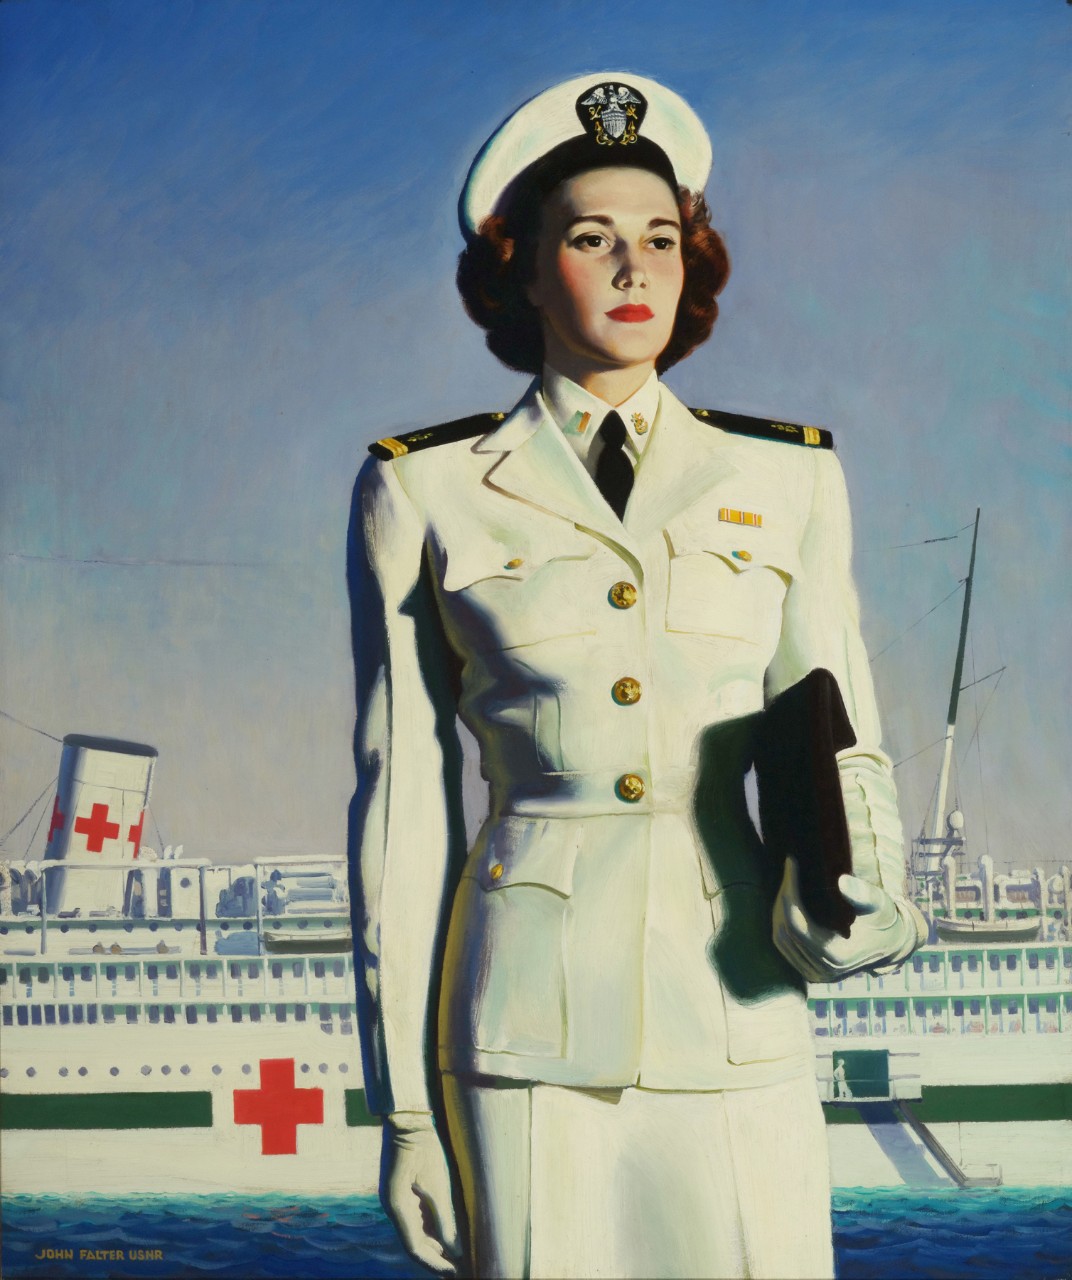 WAVE officer standing in front of a Hospital Ship